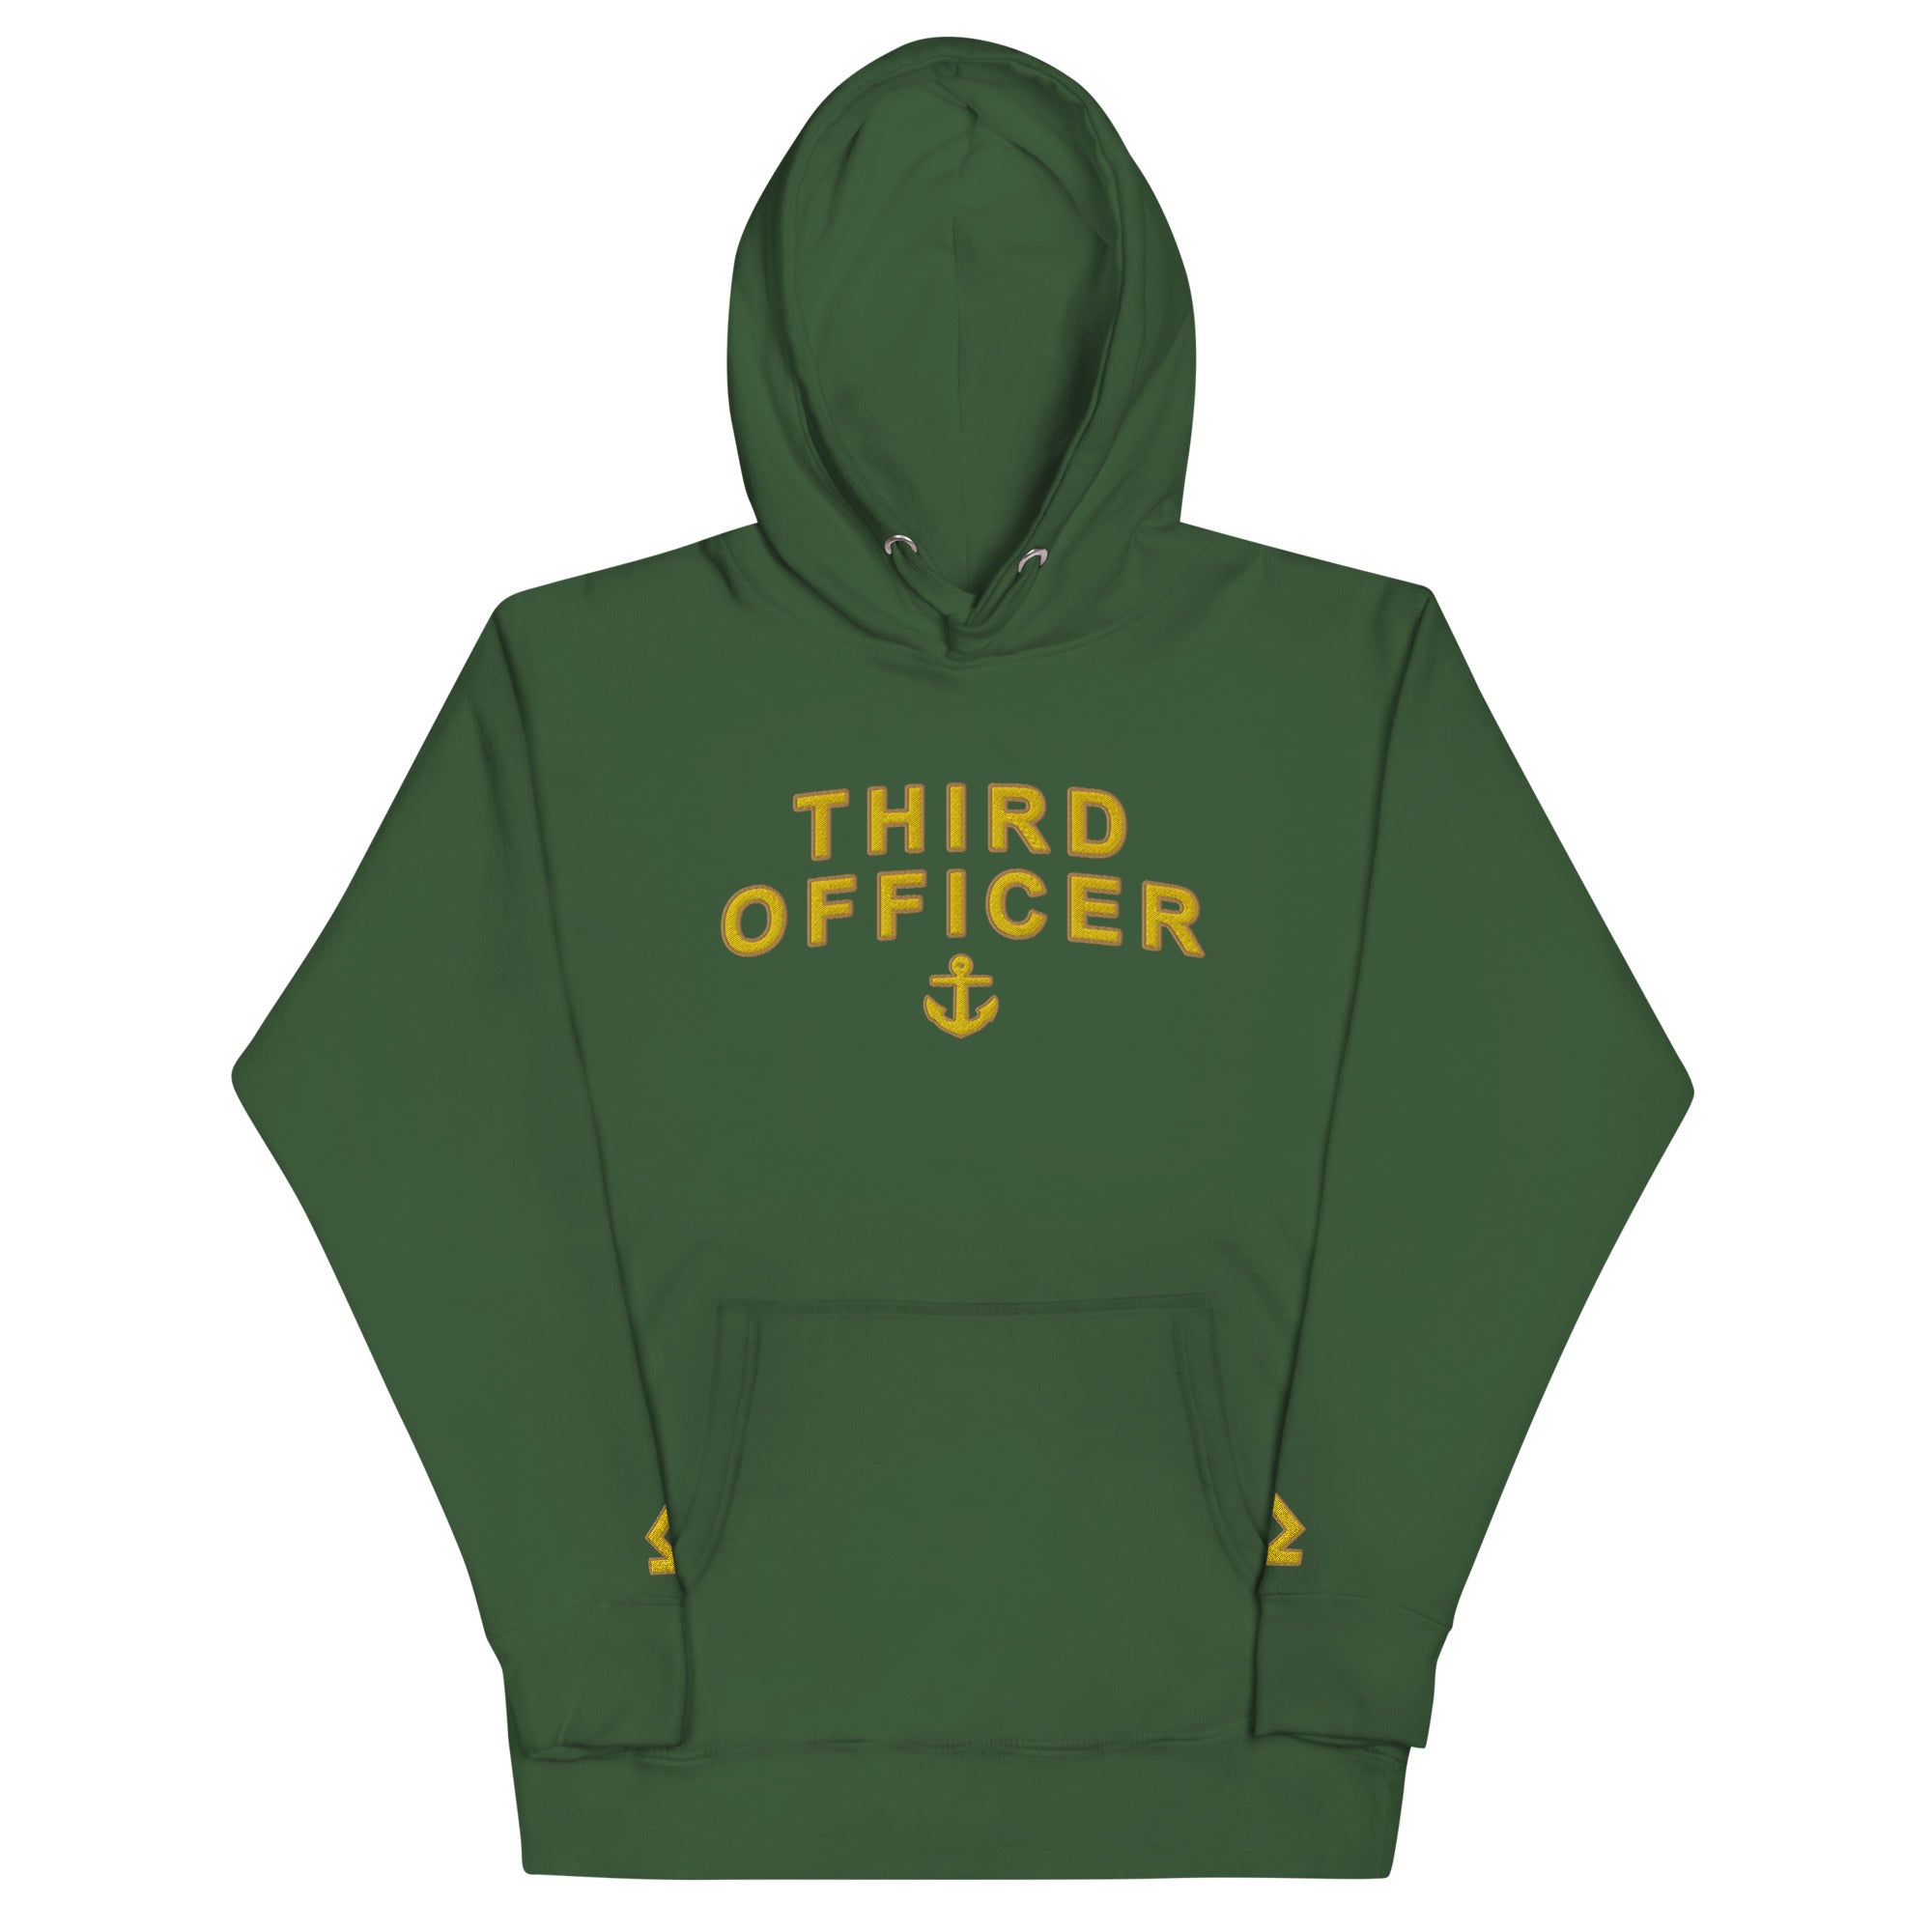 3OFF Hoodie with large embroidery and sleeves (Choose epaulettes style)